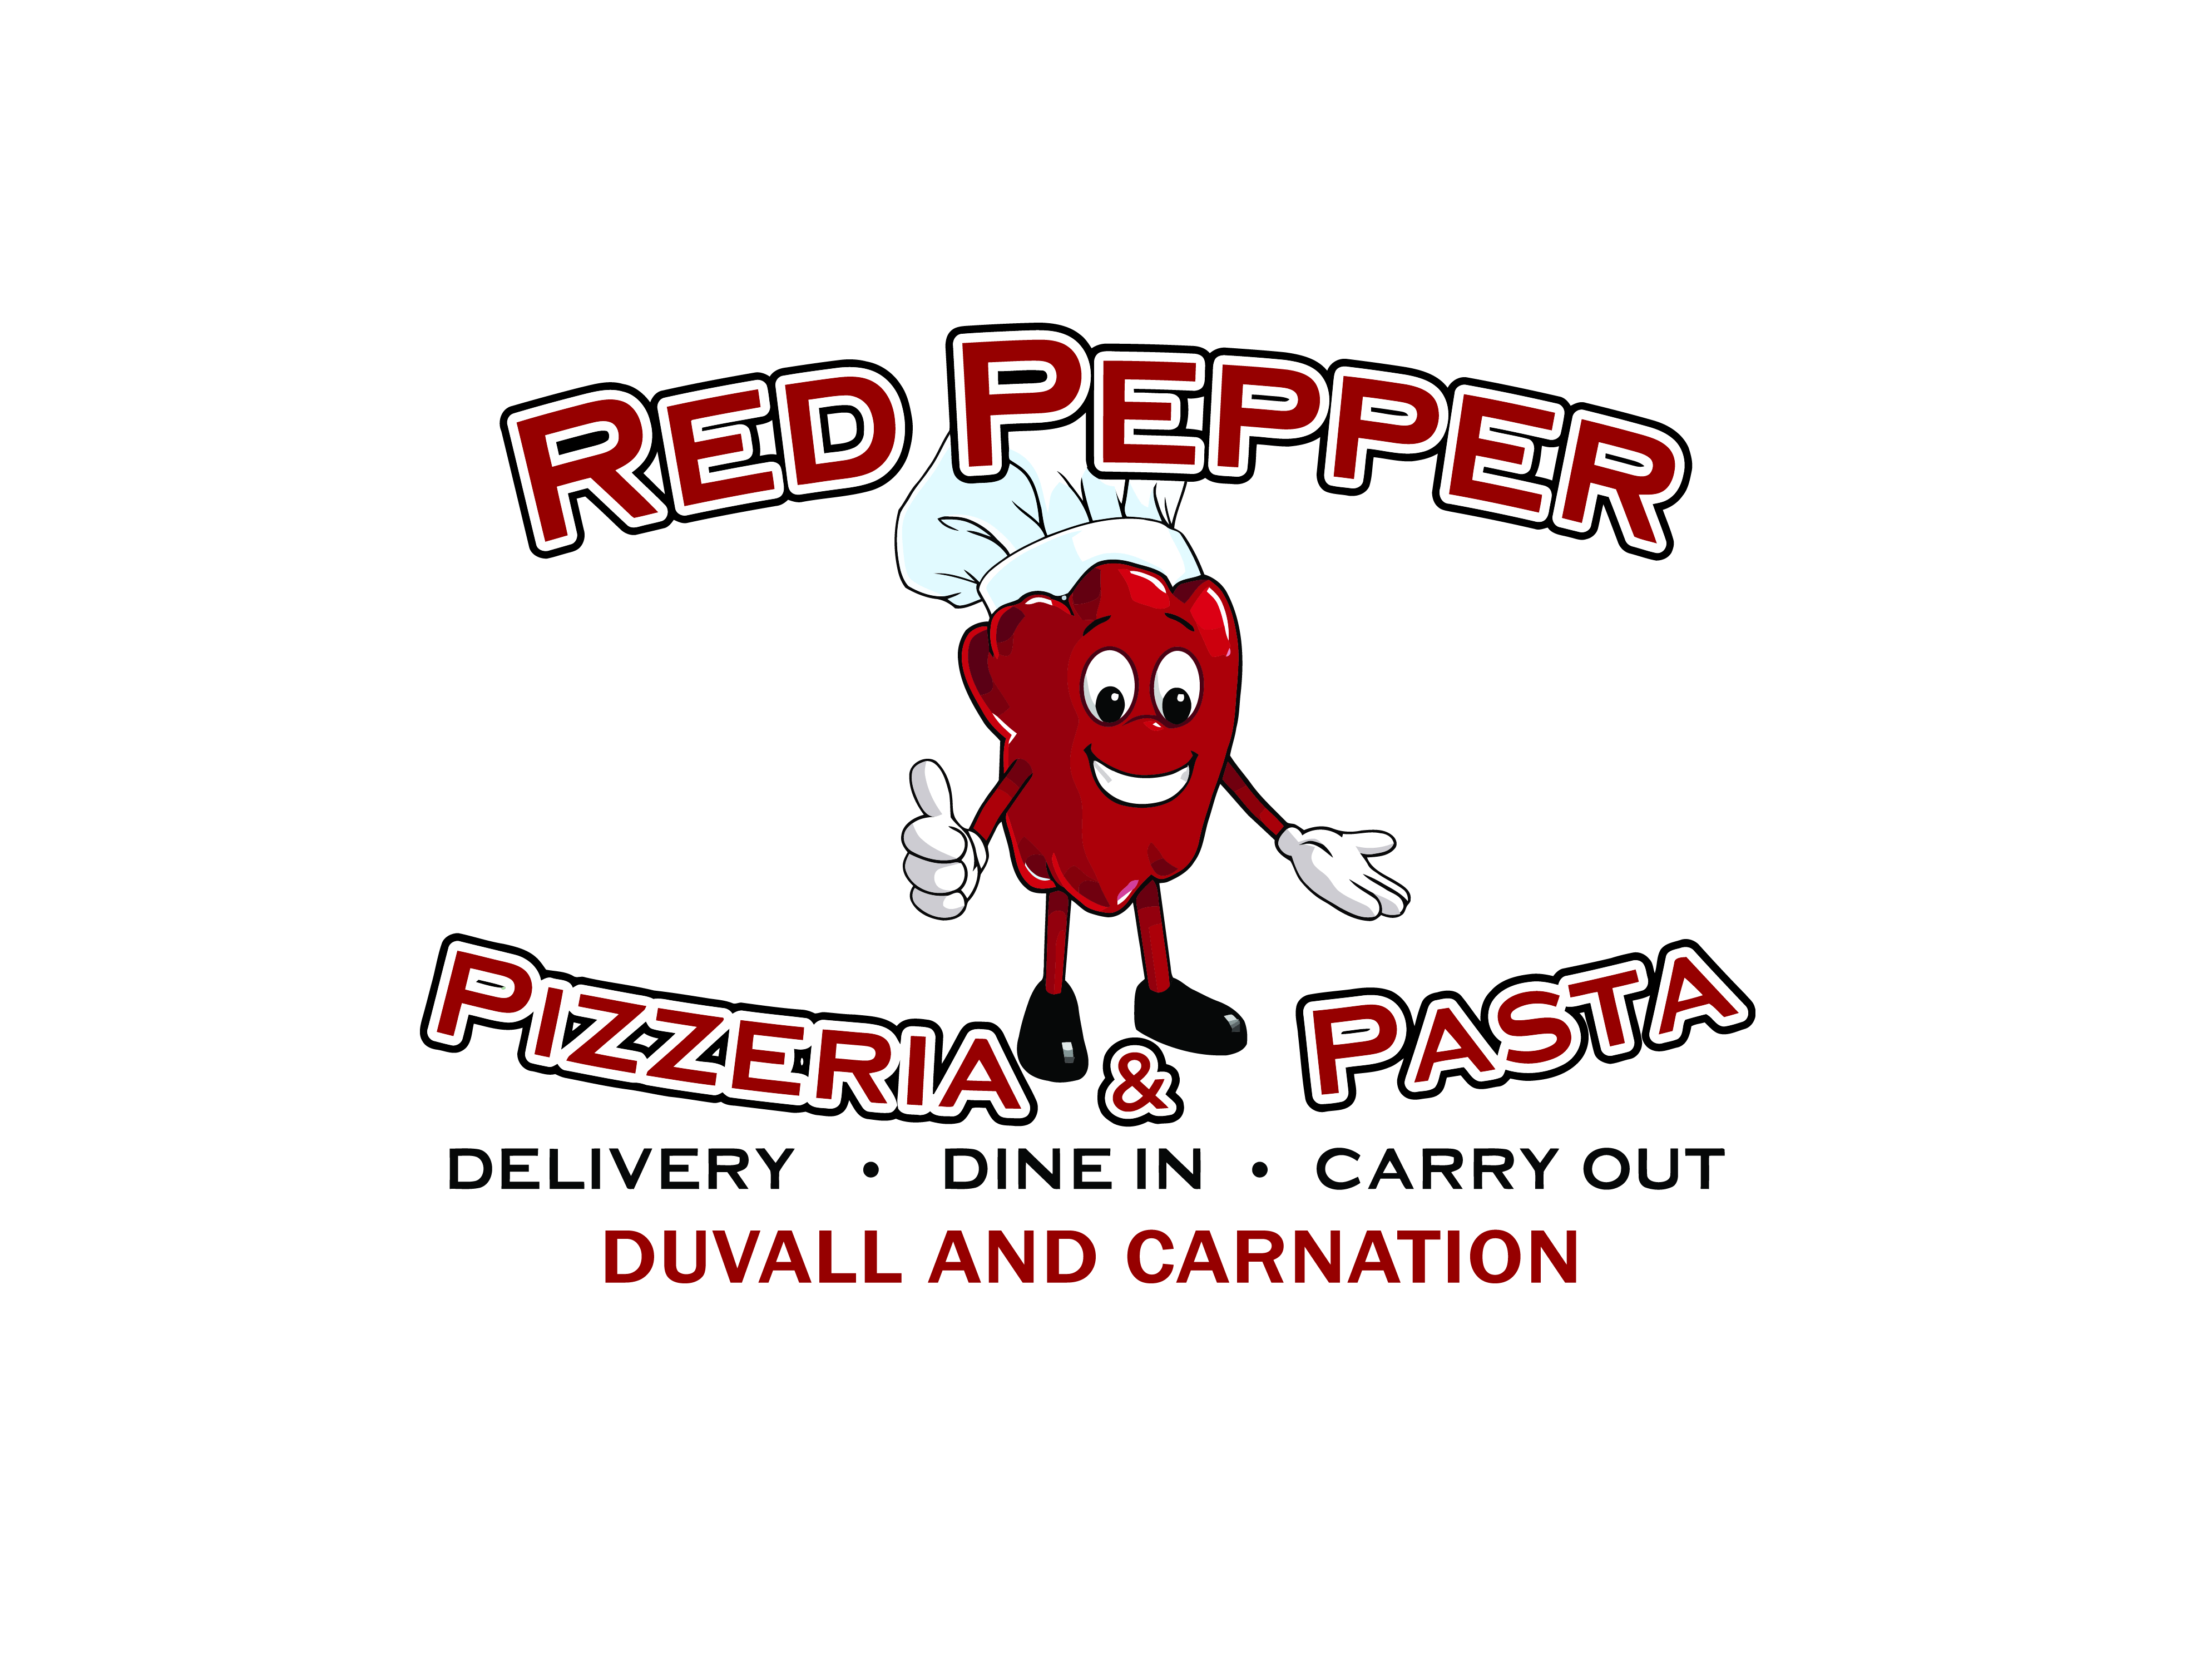 Red Pizza Logo - Red Pepper Pizzeria & Pasta. Order Online. Delivery or Eat In